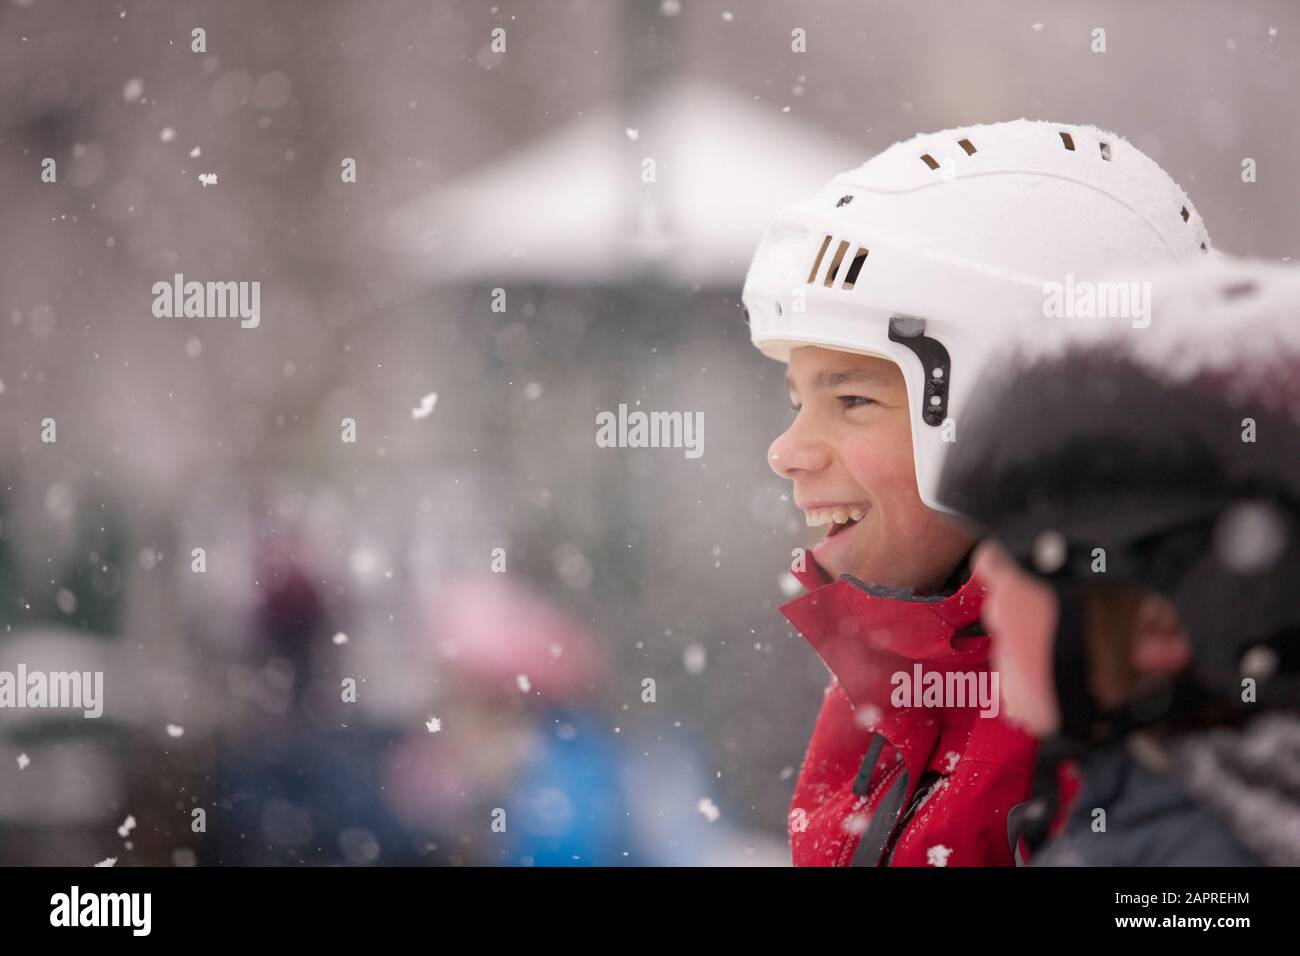 Two children wearing helmets standing in a snowfall Stock Photo